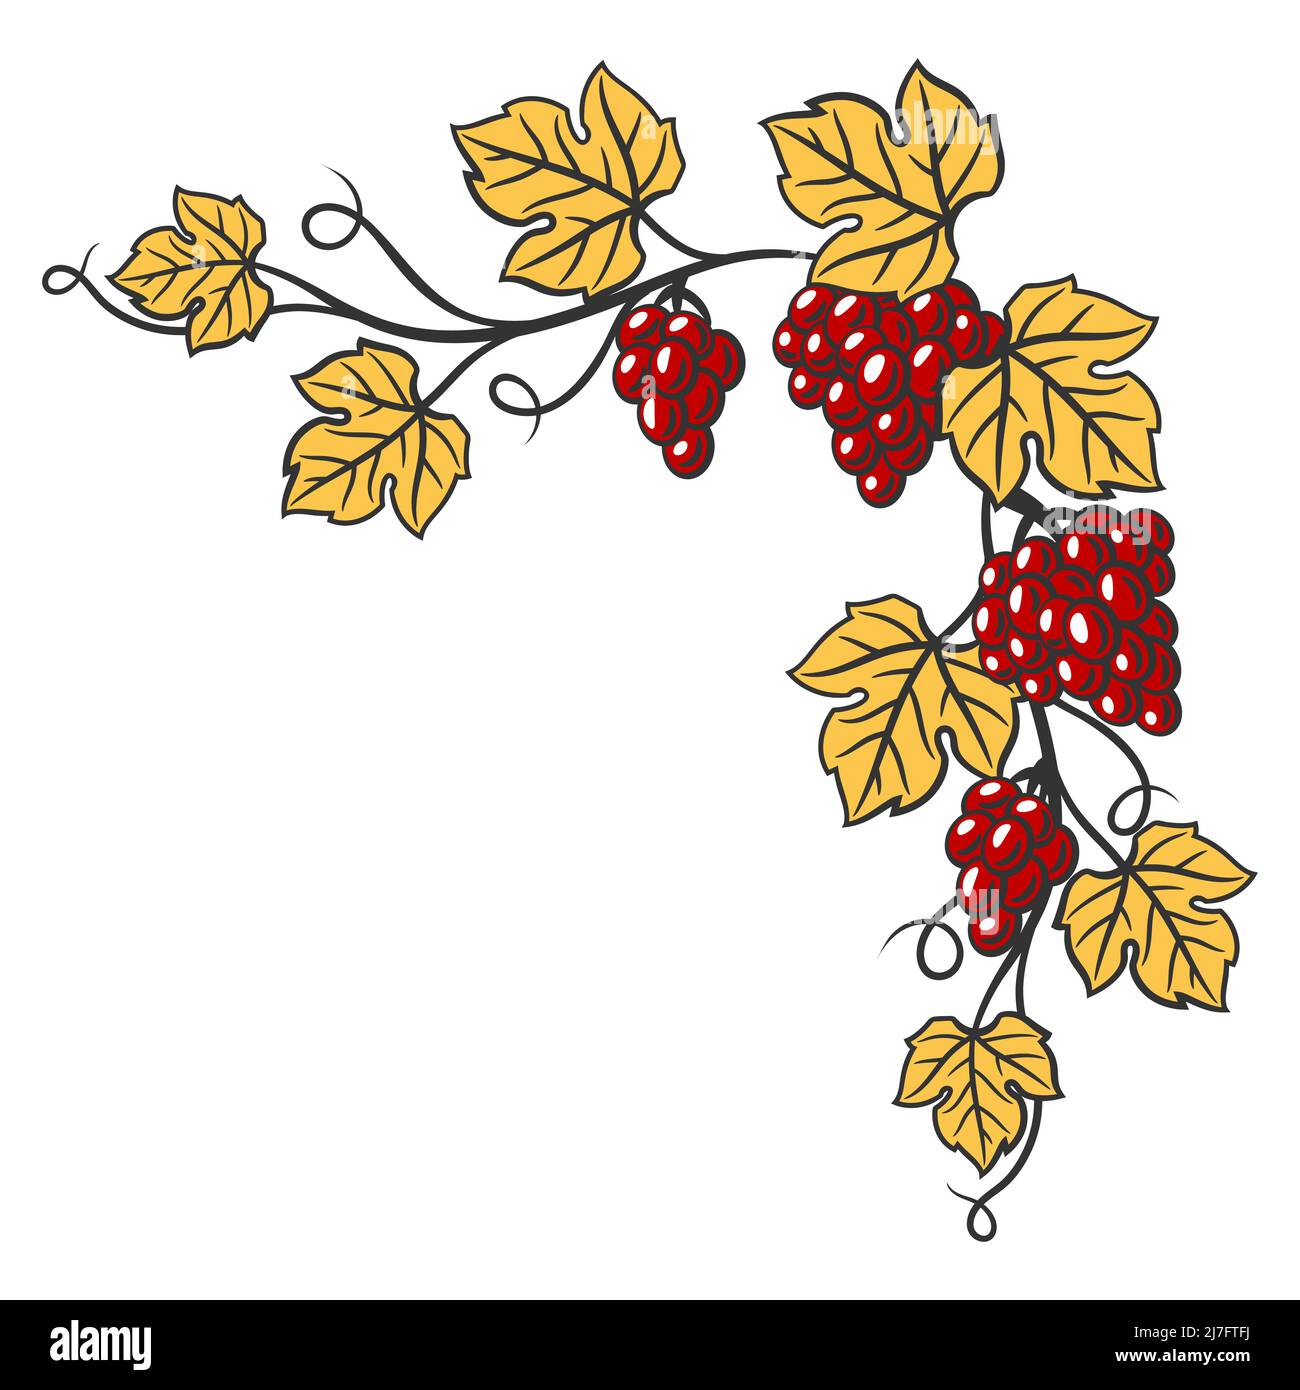 Frame of vine with leaves and bunches of grapes. Winery image for restaurants and bars. Business and agricultural item. Stock Vector